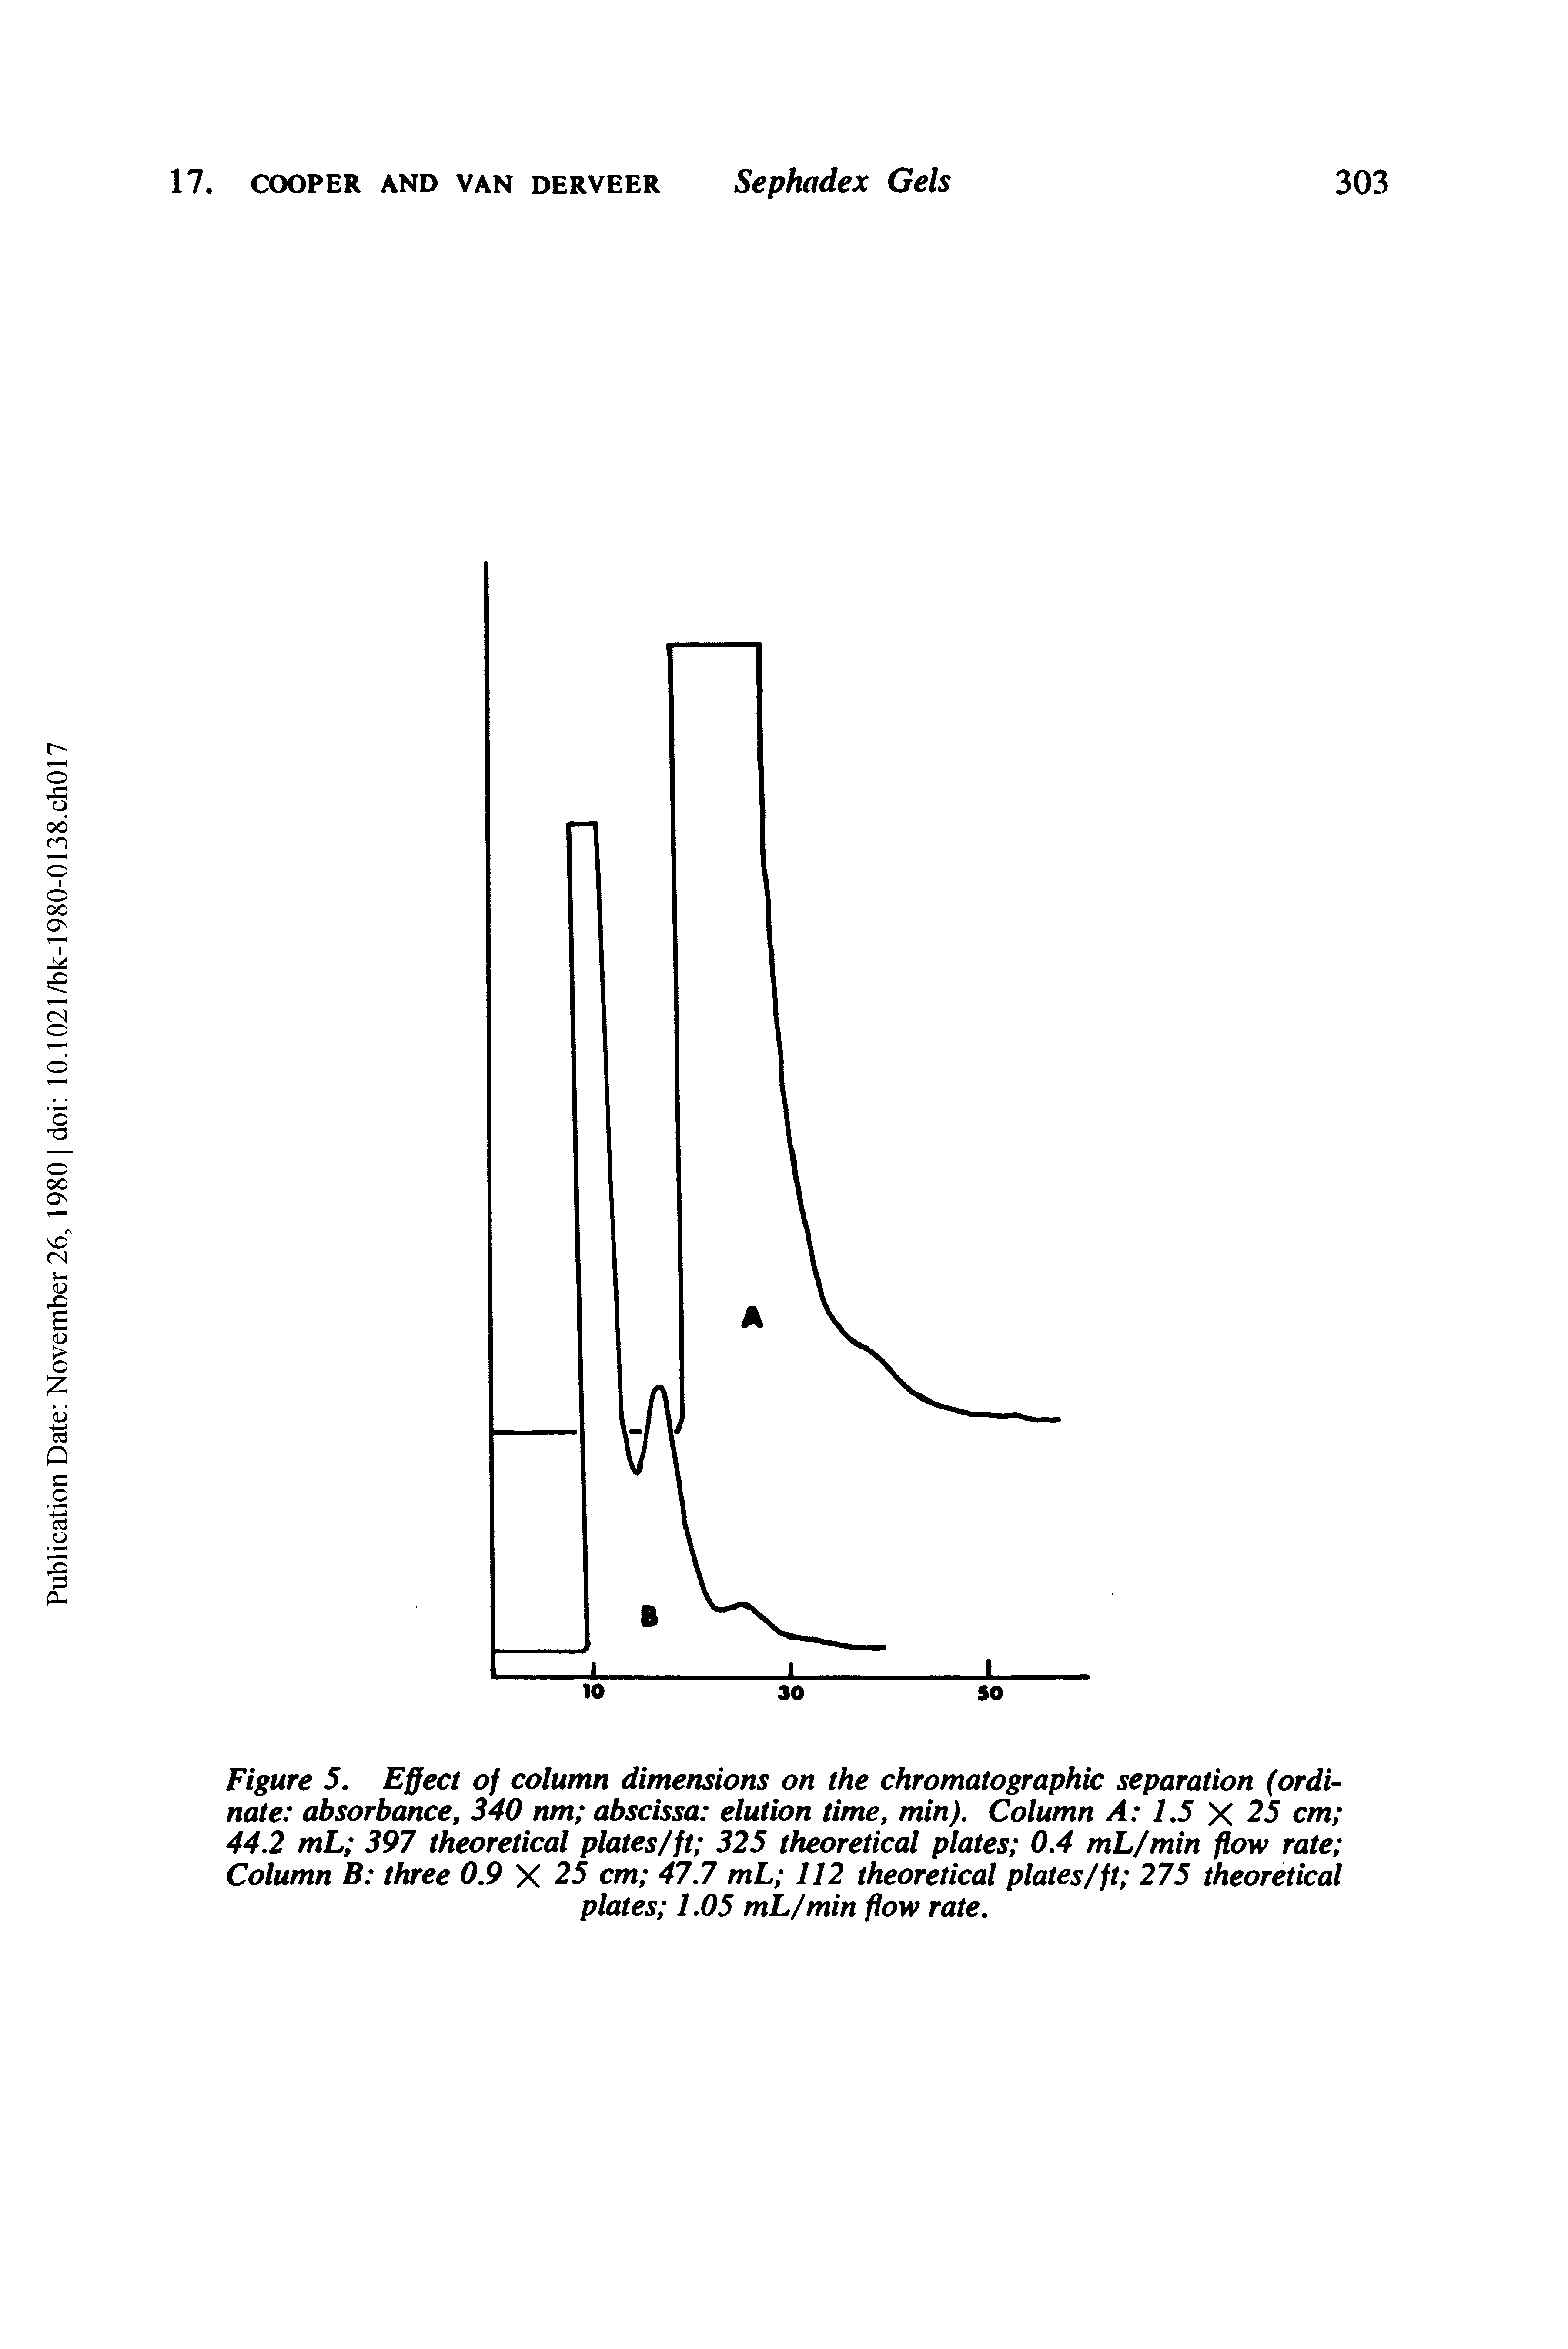 Figure 5. Effect of column dimensions on the chromatographic separation (ordinate absorbance, 340 nm abscissa elution time, min). Column A 1.5 yi 25 cm 442 mL 397 theoretical plates/ft 325 theoretical plates 0.4 mL/min flow rate Column B three 0.9 X 25 cm 47.7 mL 112 theoretical plates/ft 275 theoretical plates 1.05 mL/min flow rate.